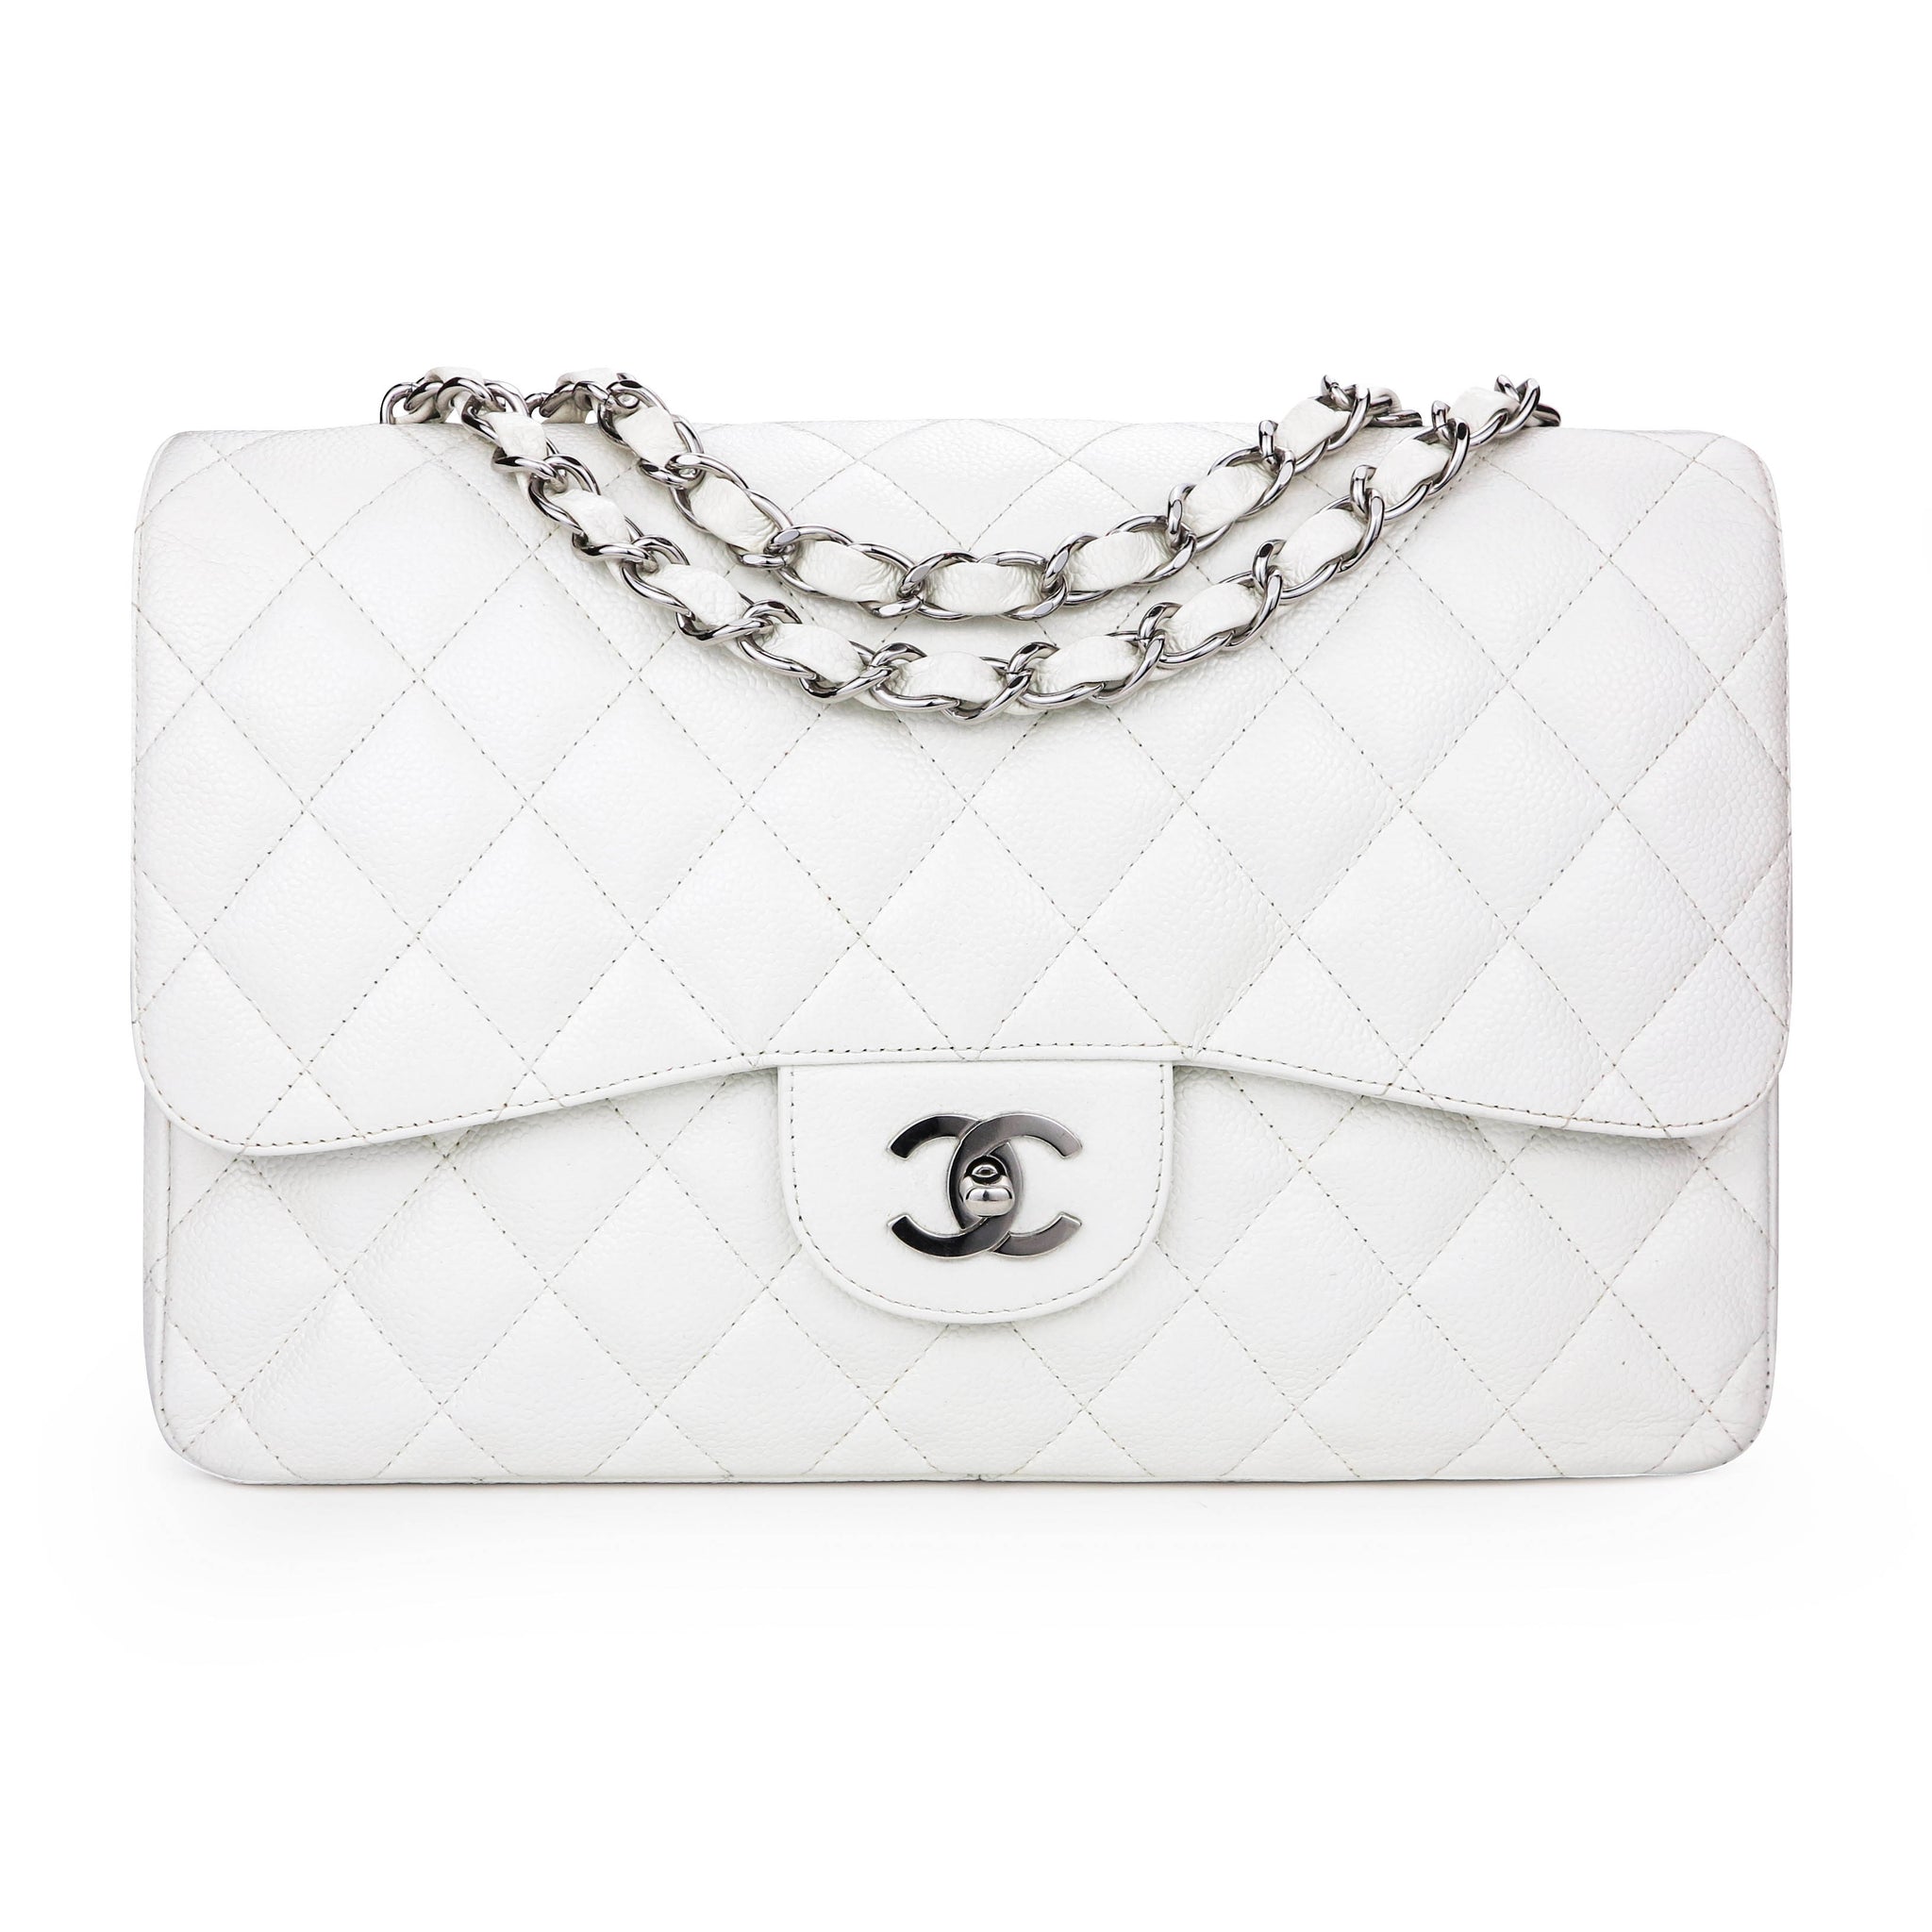 My Honest Review of The Chanel Classic Flap Bag  Mia Mia Mine